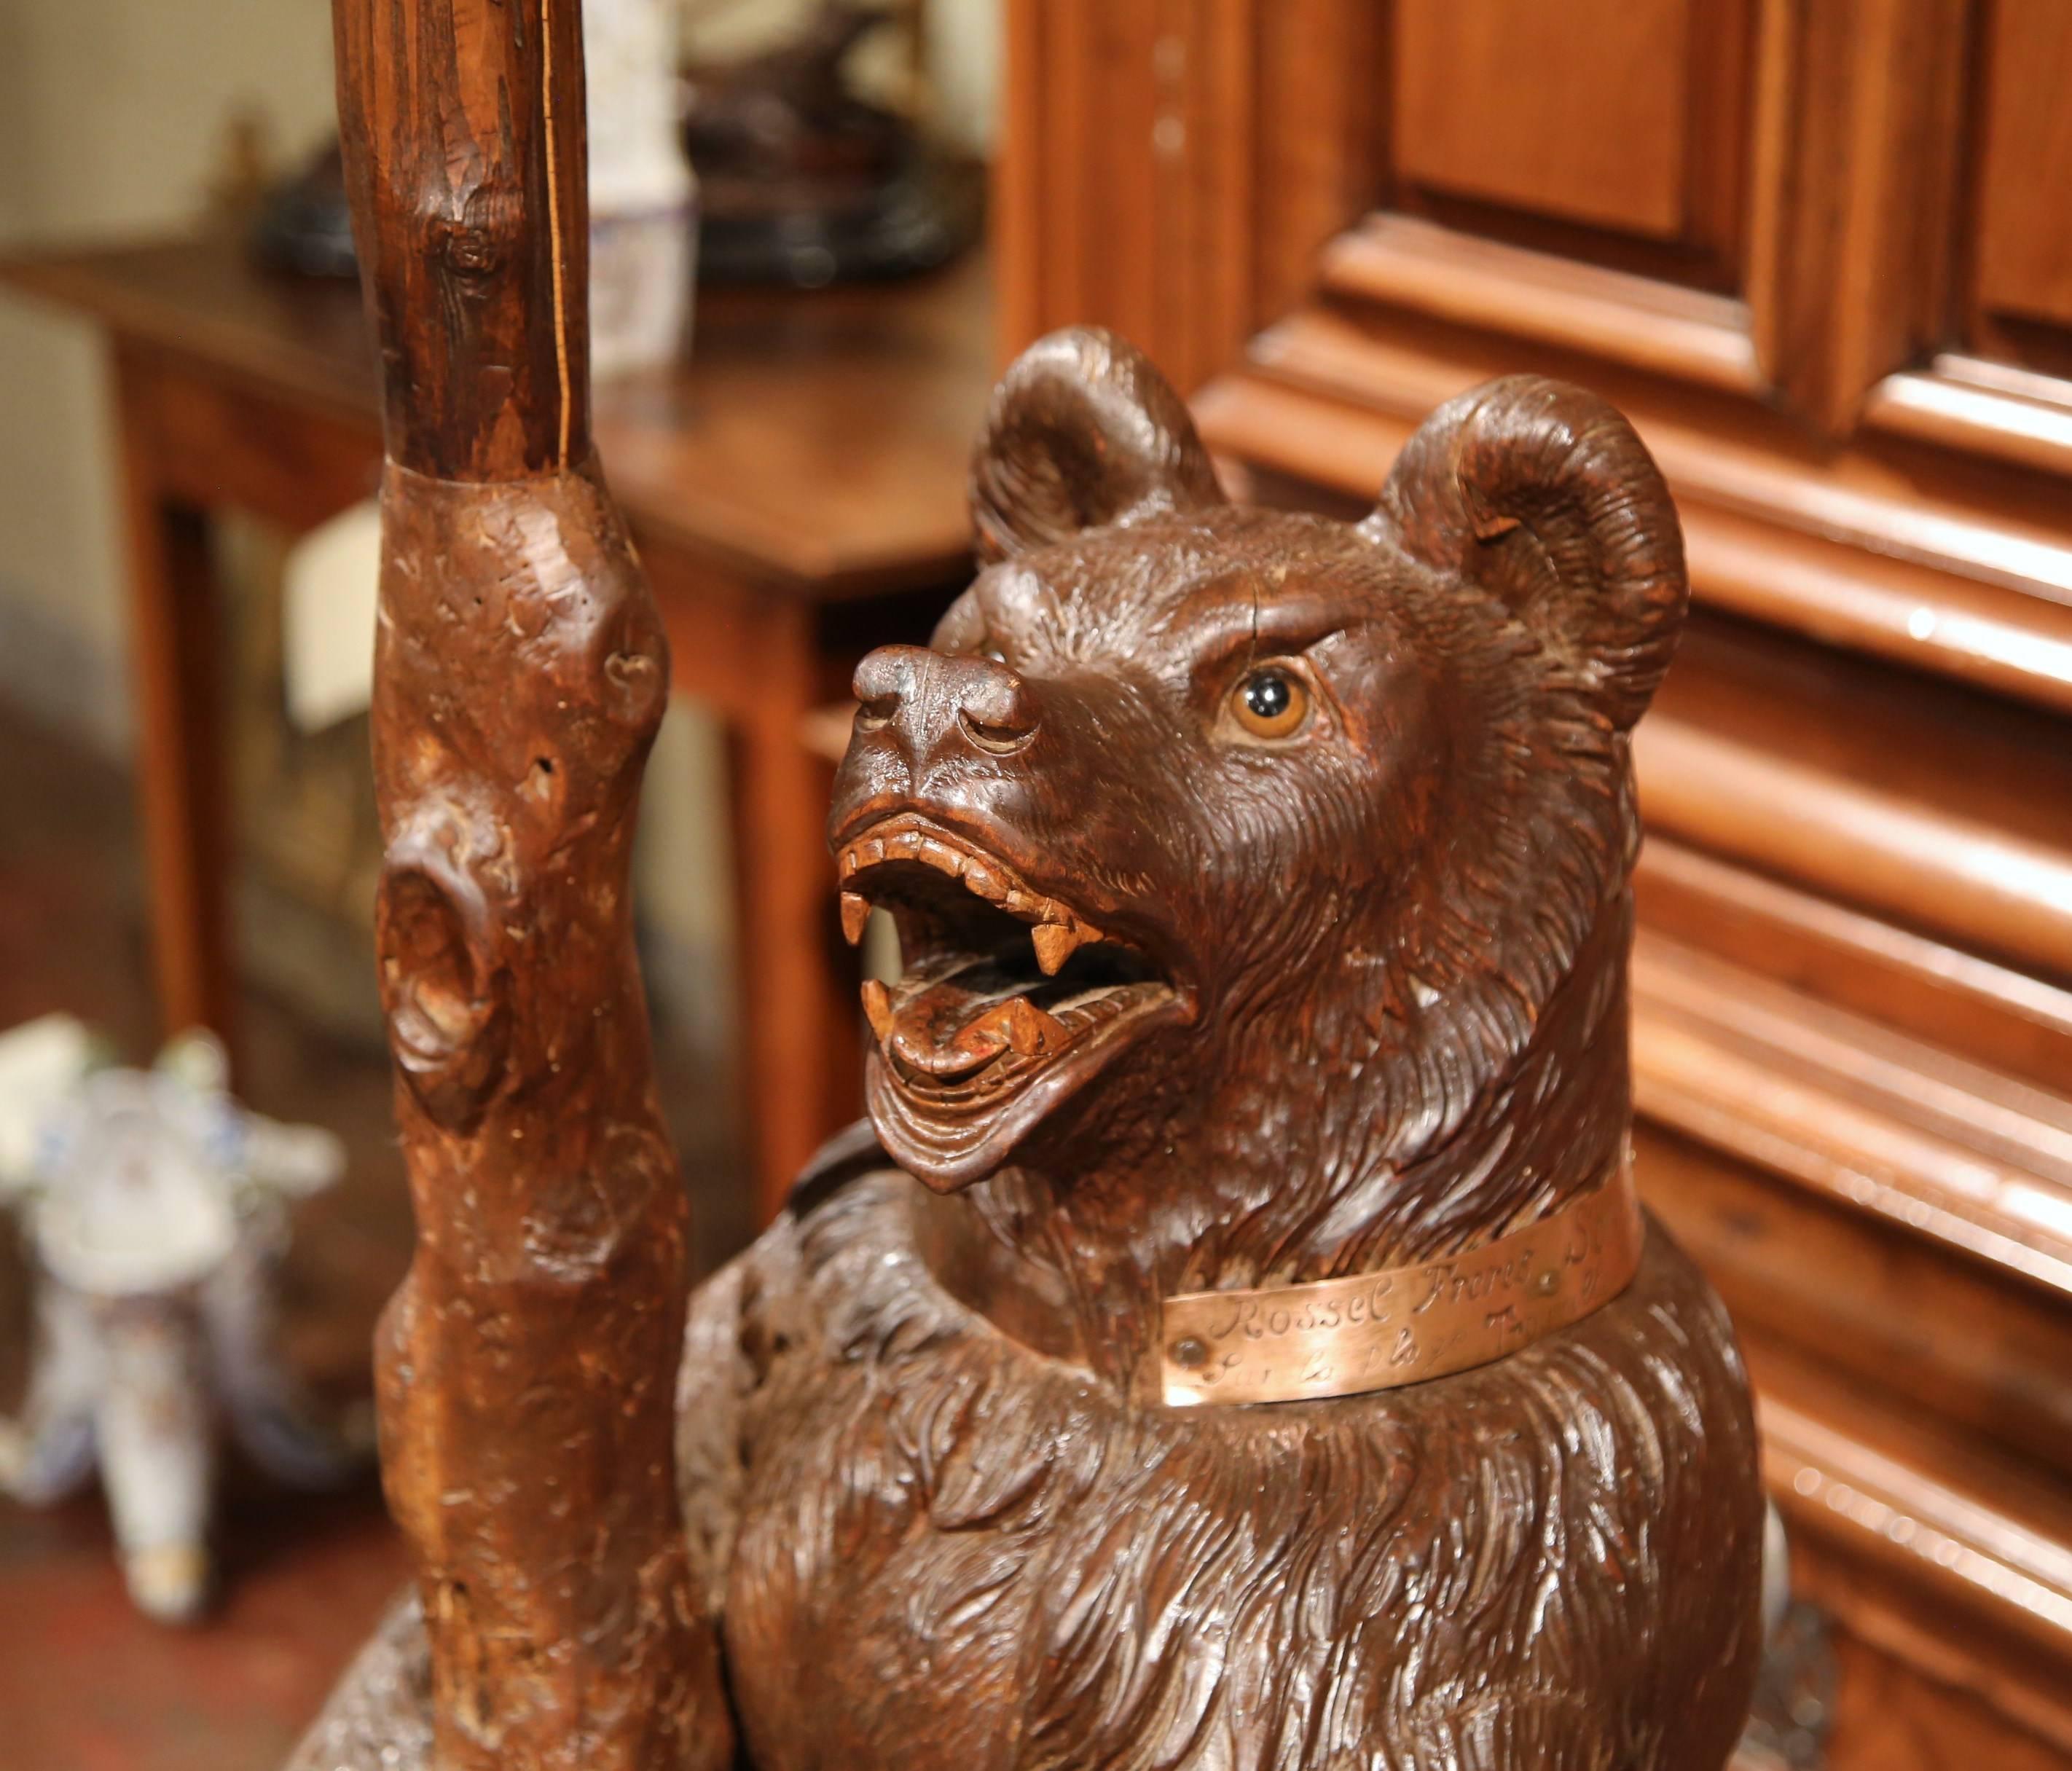 This beautiful, antique walnut bear umbrella stand was crafted in Switzerland, circa 1860. The animal sculpture features a standing bear embellished with original glass eyes, and a slightly stained mouth and tongue. The fruitwood mammal has a copper